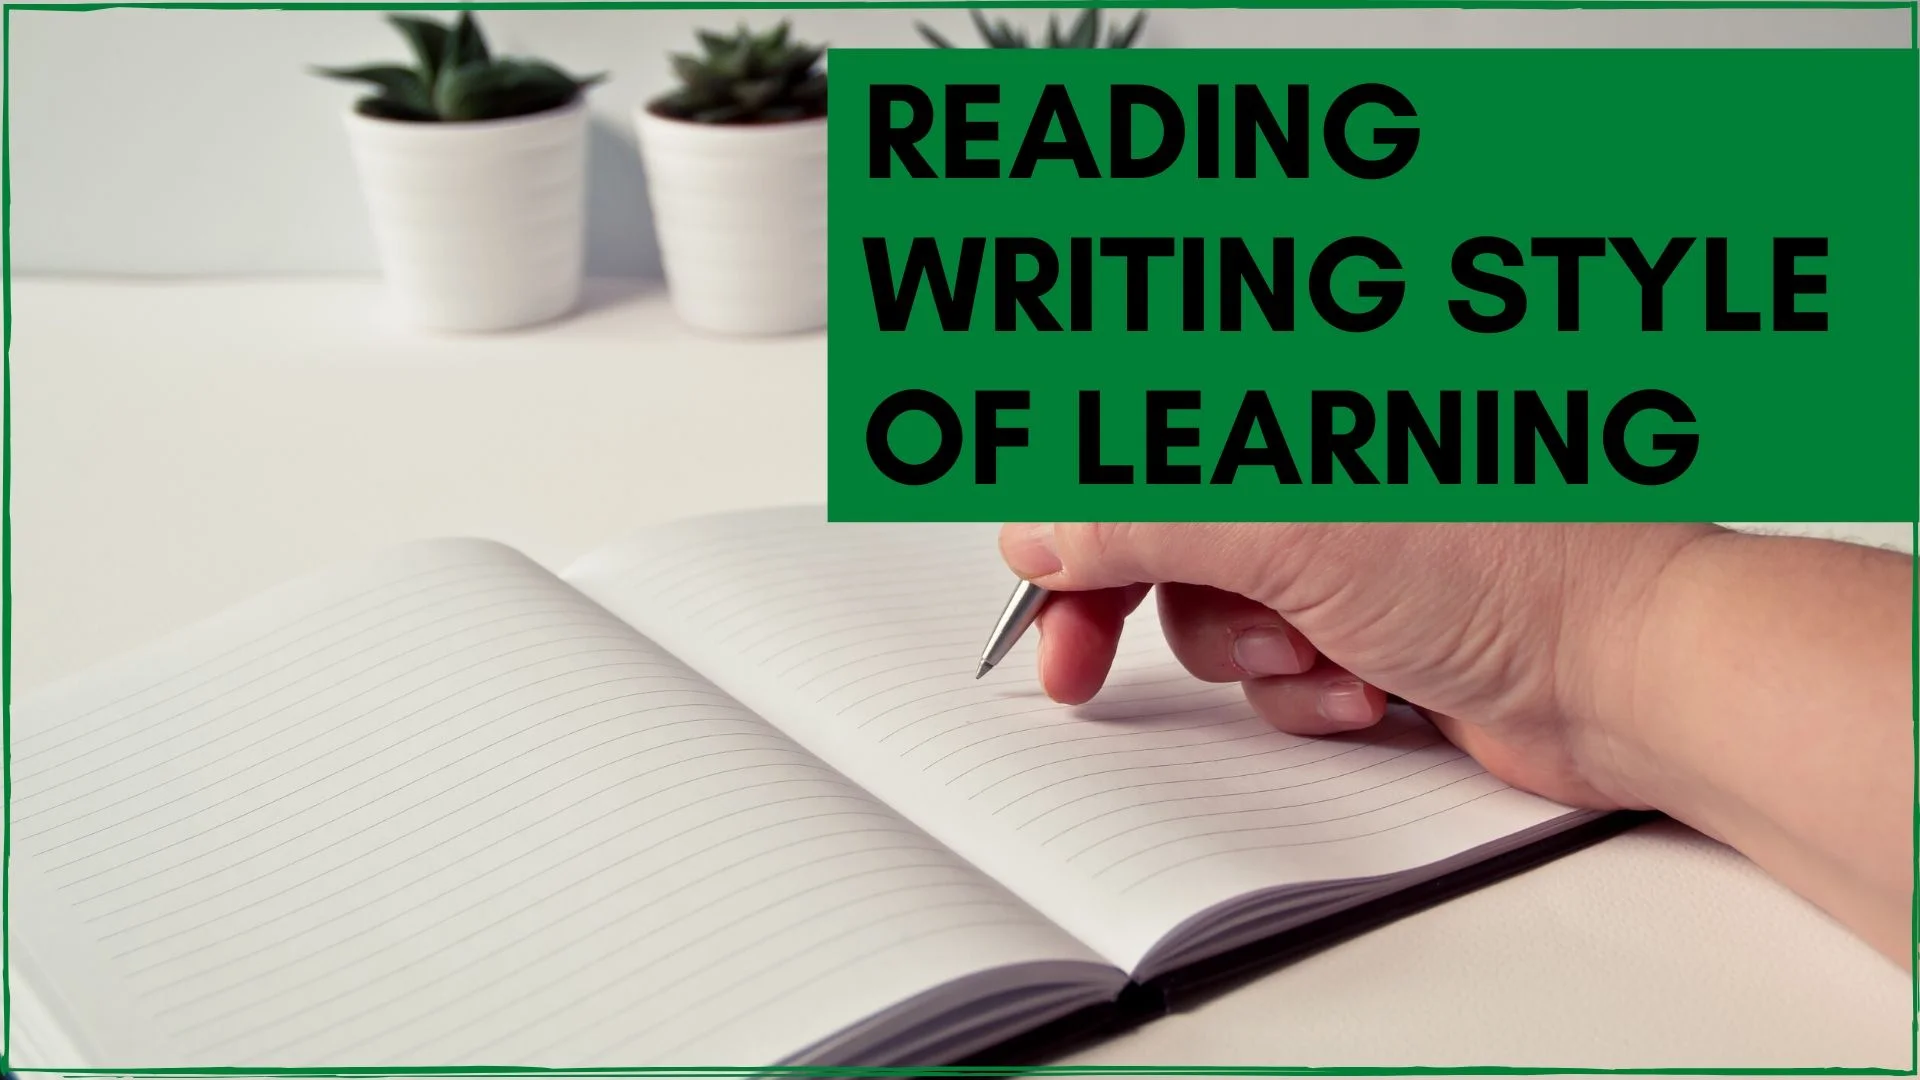 Reading Writing style of learning